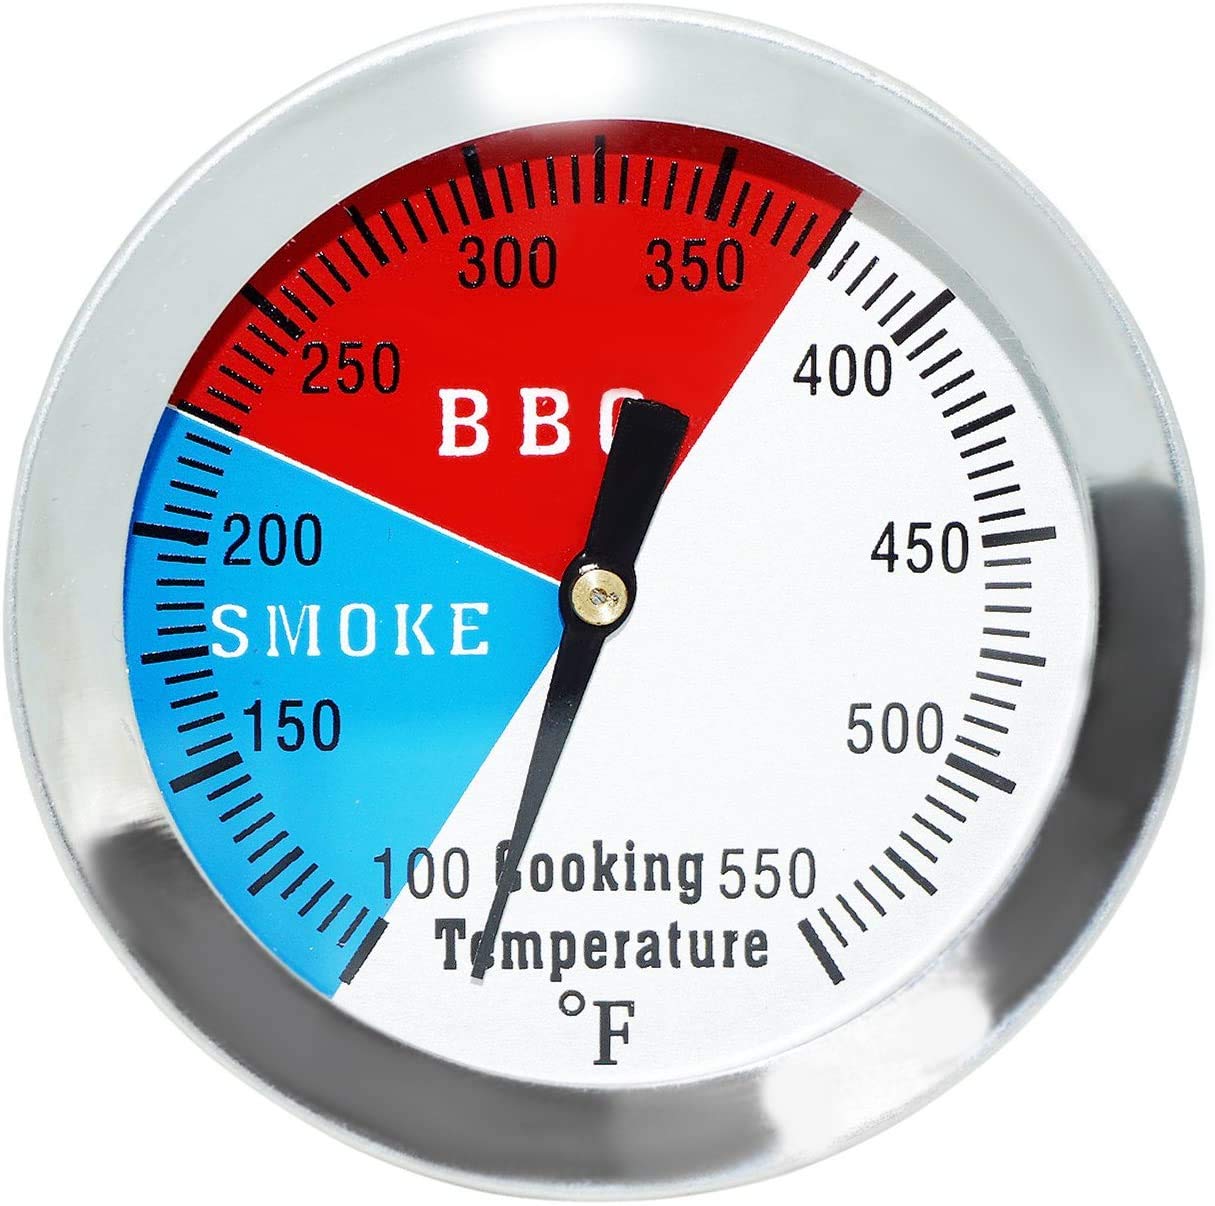 2 Inch BBQ Thermometer Gauge, Charcoal Grill Pit Smoker Temp Gauge Grill Thermometer-YAOAWE